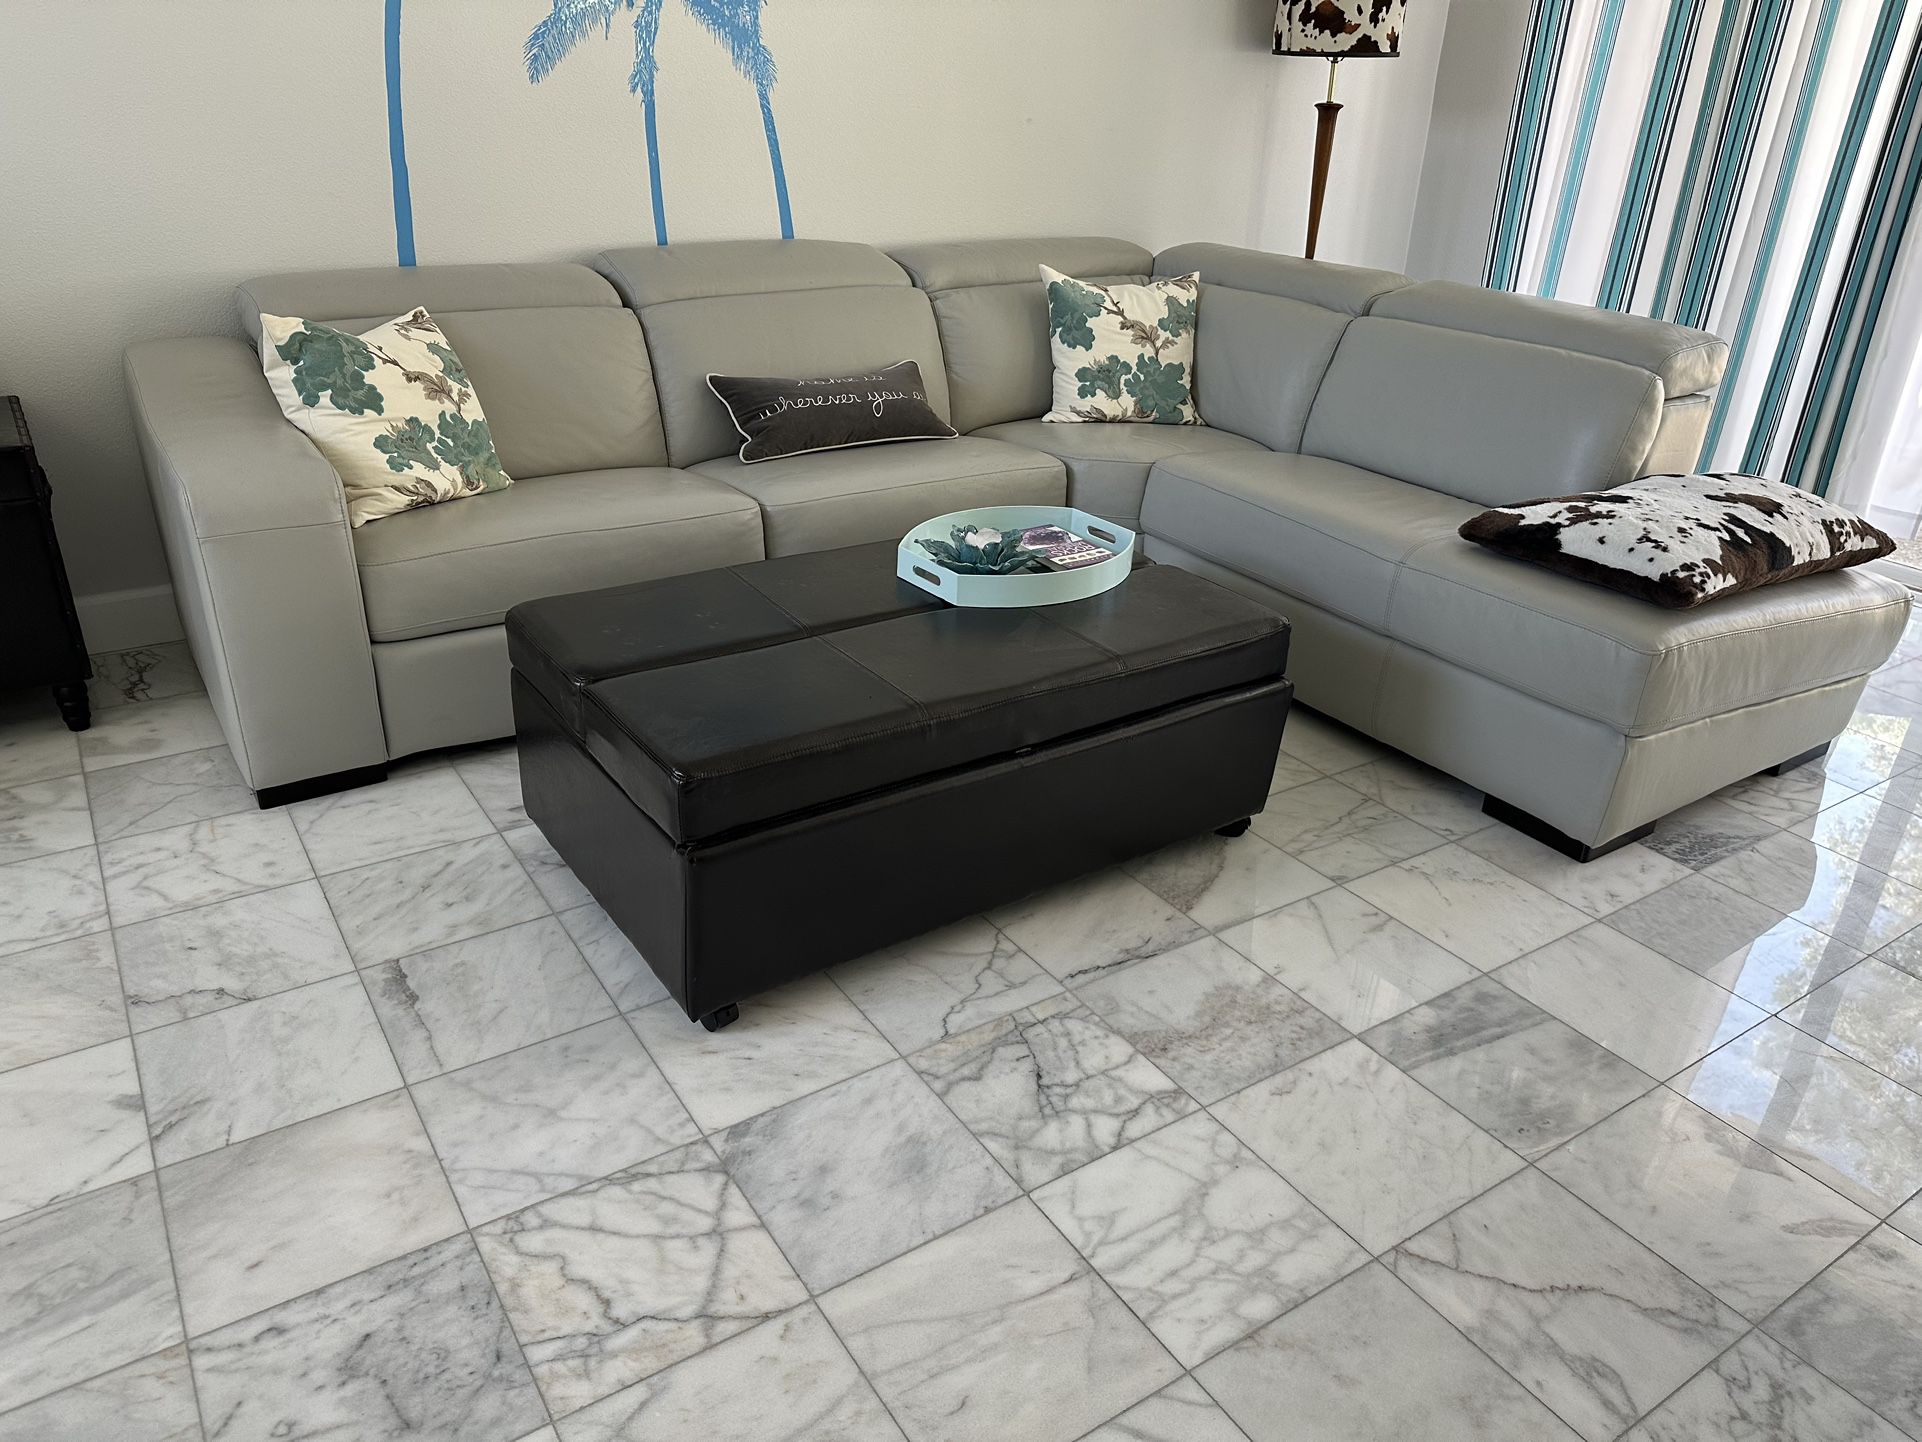 Gray Leather Design Center Sectional Sofa / Double Recliner / Headrests